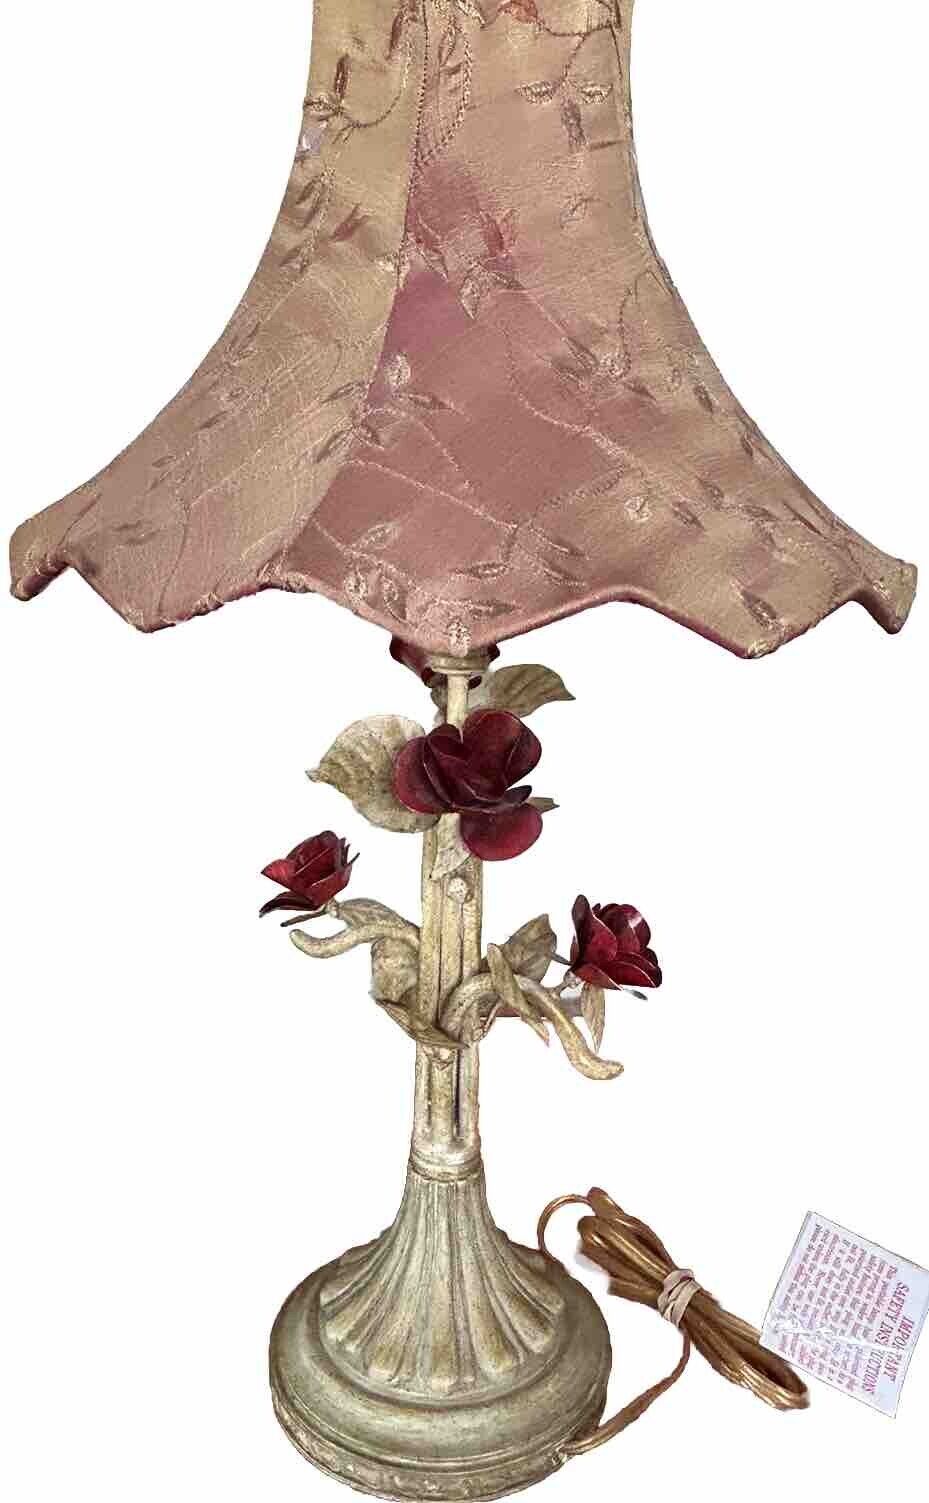 Vintage French Lamp With Red Roses Measures 28”X 17”